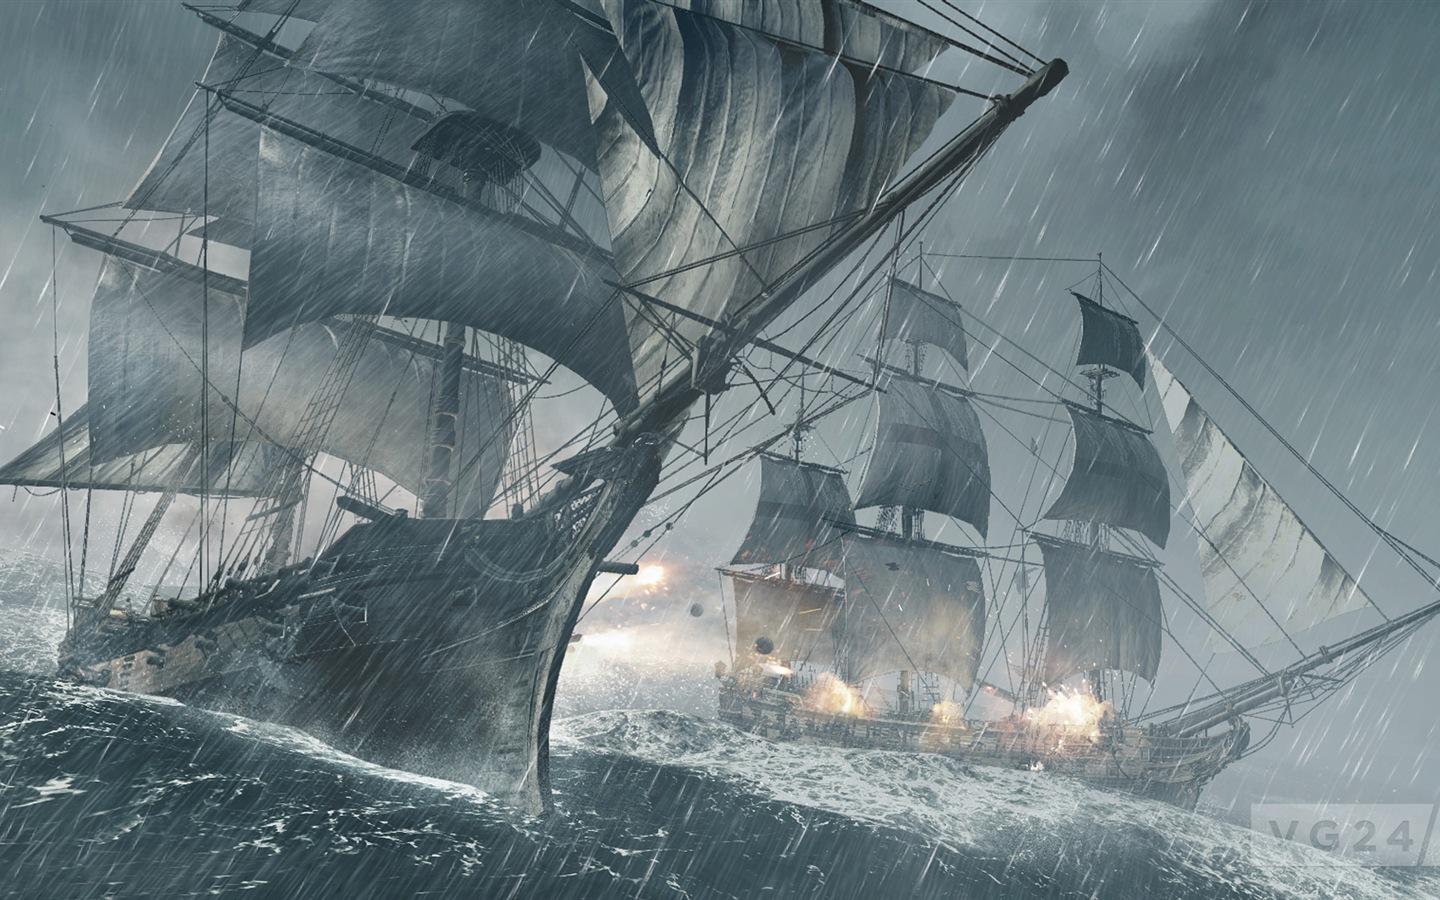 Creed IV Assassin: Black Flag HD wallpapers #19 - 1440x900